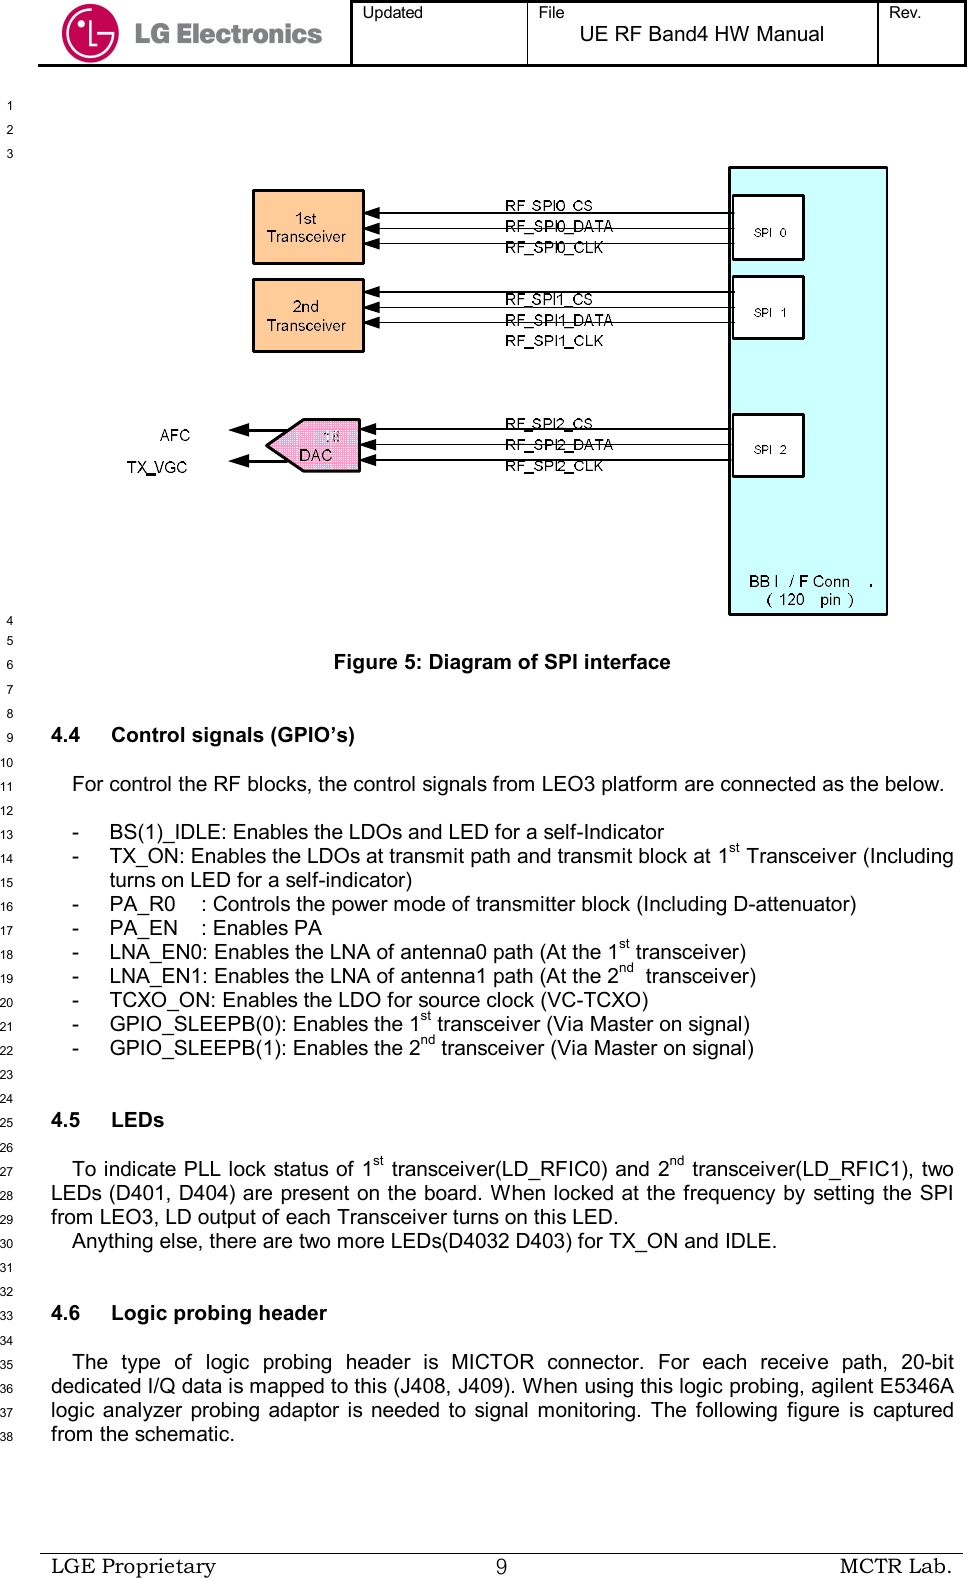  Updated  File UE RF Band4 HW Manual Rev.    LGE Proprietary  ９ MCTR Lab.   1  2  3  4  5 Figure 5: Diagram of SPI interface 6  7  8 4.4  Control signals (GPIO’s) 9  10 For control the RF blocks, the control signals from LEO3 platform are connected as the below. 11  12 -  BS(1)_IDLE: Enables the LDOs and LED for a self-Indicator 13 -  TX_ON: Enables the LDOs at transmit path and transmit block at 1st Transceiver (Including 14 turns on LED for a self-indicator) 15 -  PA_R0  : Controls the power mode of transmitter block (Including D-attenuator) 16 -  PA_EN  : Enables PA 17 -  LNA_EN0: Enables the LNA of antenna0 path (At the 1st transceiver) 18 -  LNA_EN1: Enables the LNA of antenna1 path (At the 2nd  transceiver) 19 -  TCXO_ON: Enables the LDO for source clock (VC-TCXO) 20 -  GPIO_SLEEPB(0): Enables the 1st transceiver (Via Master on signal) 21 -  GPIO_SLEEPB(1): Enables the 2nd transceiver (Via Master on signal) 22  23  24 4.5  LEDs 25  26 To indicate PLL lock status of 1st transceiver(LD_RFIC0) and 2nd transceiver(LD_RFIC1), two 27 LEDs (D401, D404) are present on the board. When locked at the frequency  by setting the SPI 28 from LEO3, LD output of each Transceiver turns on this LED. 29 Anything else, there are two more LEDs(D4032 D403) for TX_ON and IDLE.  30  31  32 4.6  Logic probing header 33  34 The  type  of  logic  probing  header  is  MICTOR  connector.  For  each  receive  path,  20-bit 35 dedicated I/Q data is mapped to this (J408, J409). When using this logic probing, agilent E5346A 36 logic  analyzer probing adaptor is  needed  to  signal  monitoring.  The  following  figure  is  captured 37 from the schematic. 38 